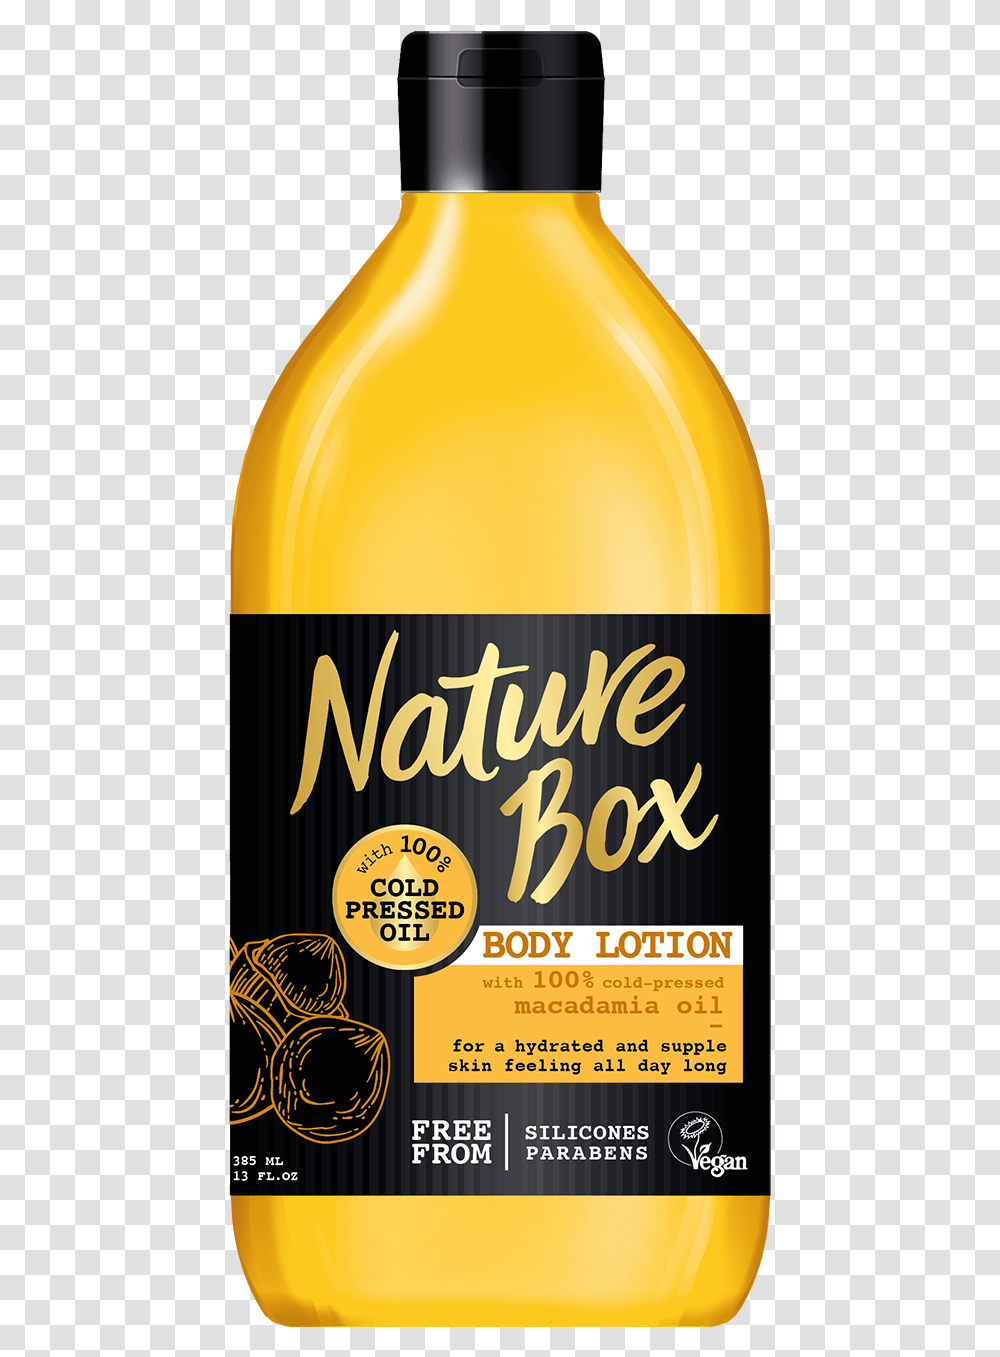 Naturebox Com Skin Macadamia Oil Body Lotion Nature Box Body Lotion, Beer, Alcohol, Beverage, Drink Transparent Png